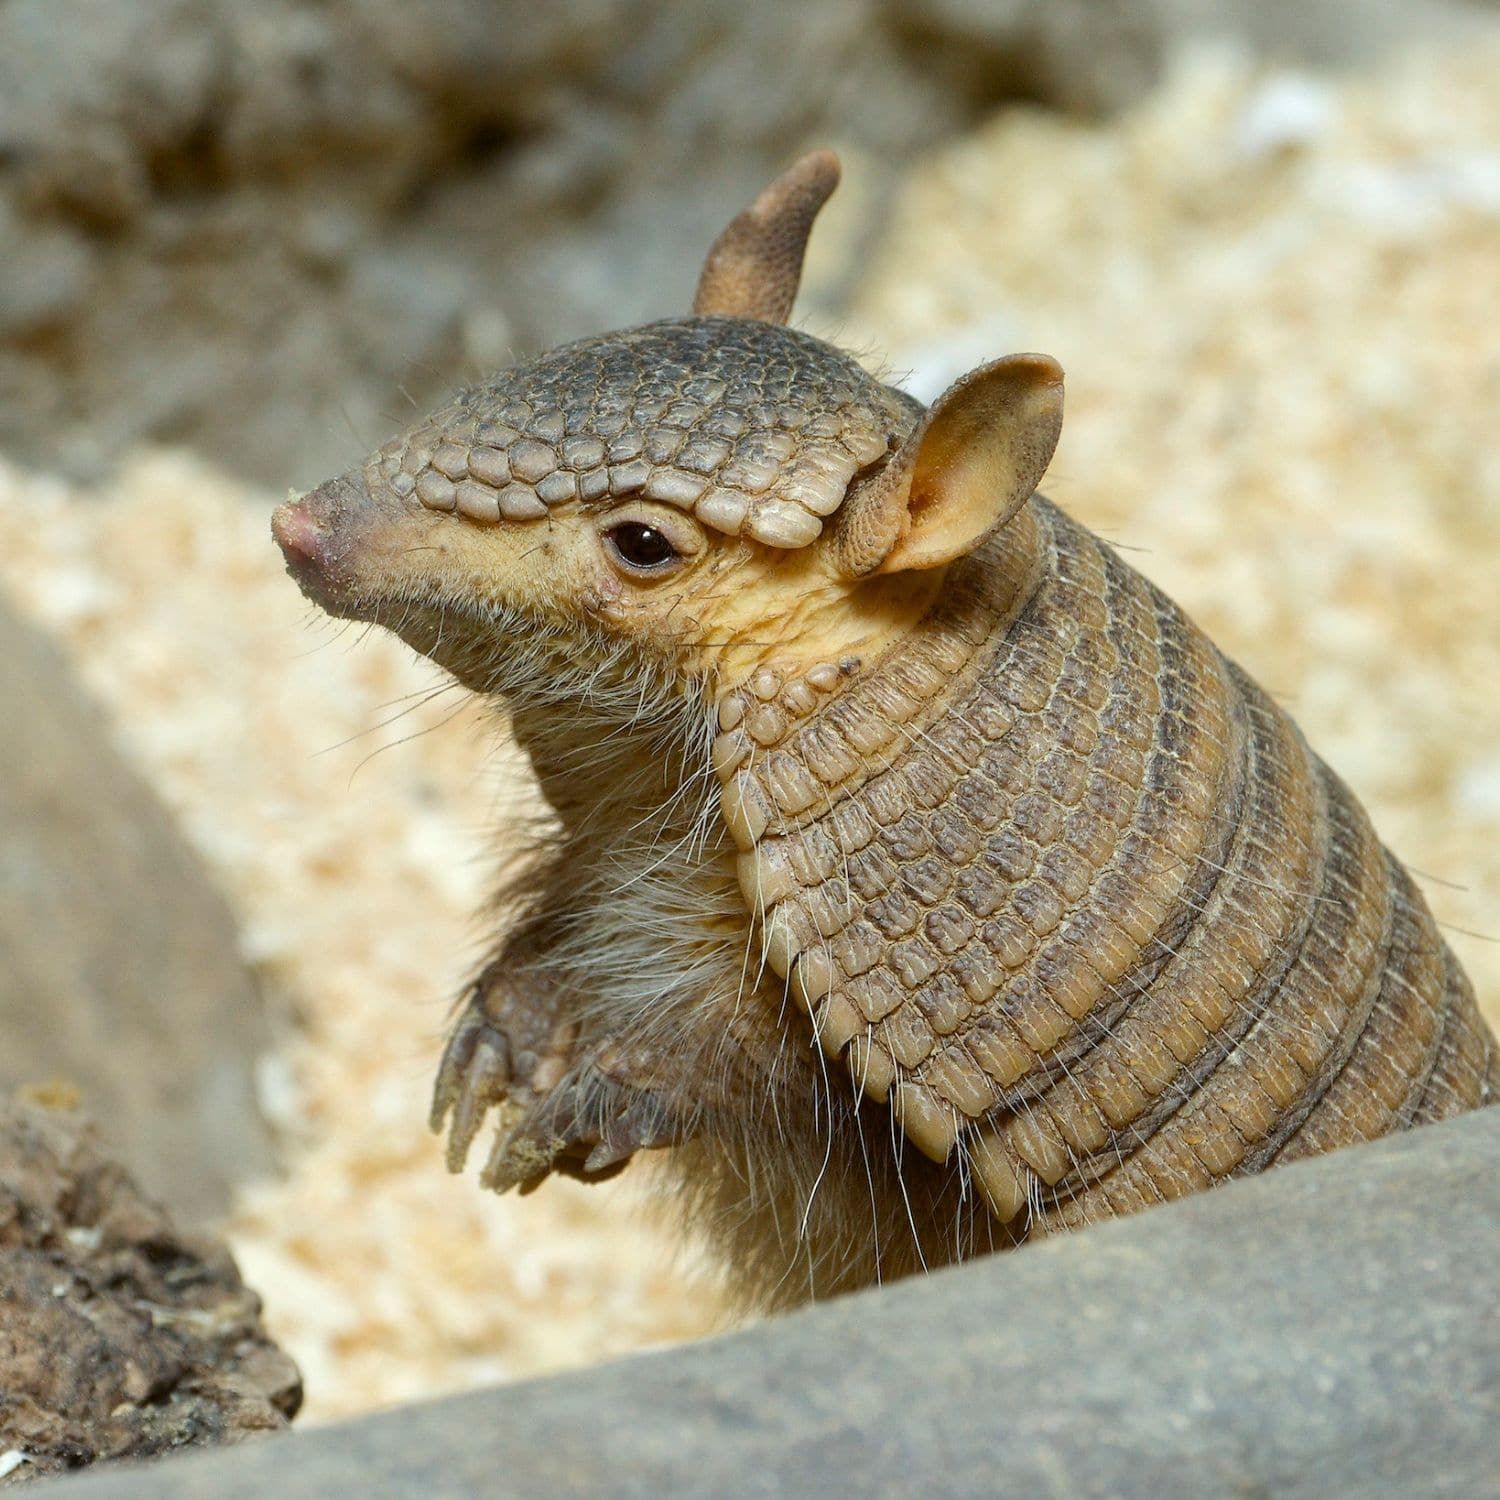 A close up of an armadillo sitting on a rock